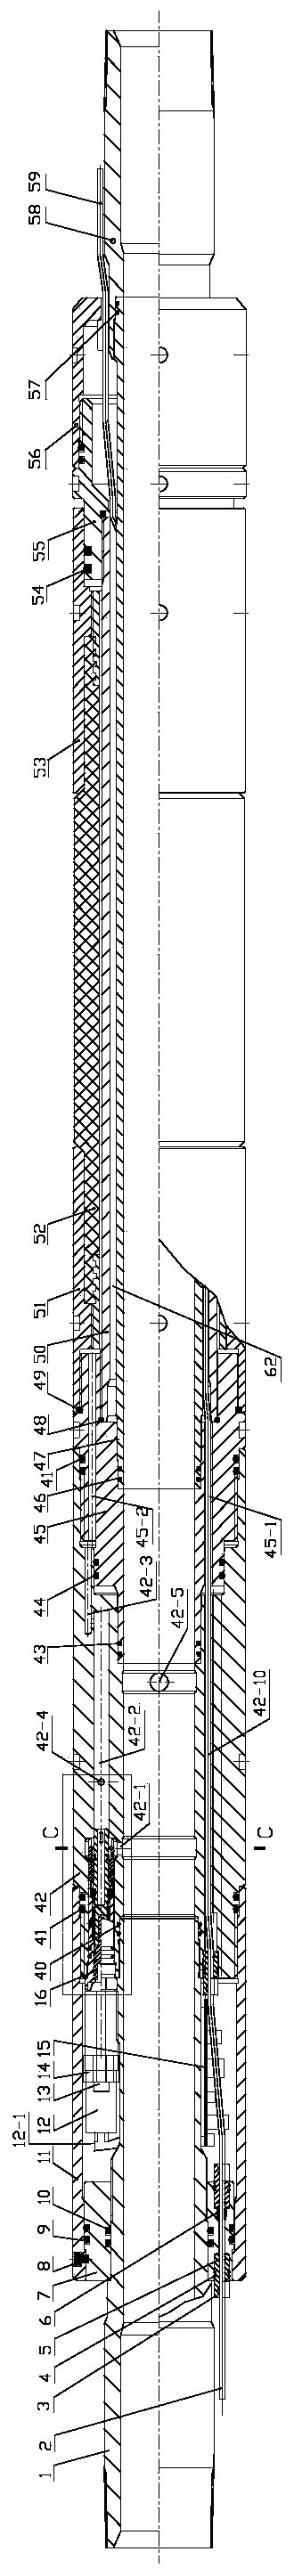 Downhole Intelligent Control Isolation and Injection Device